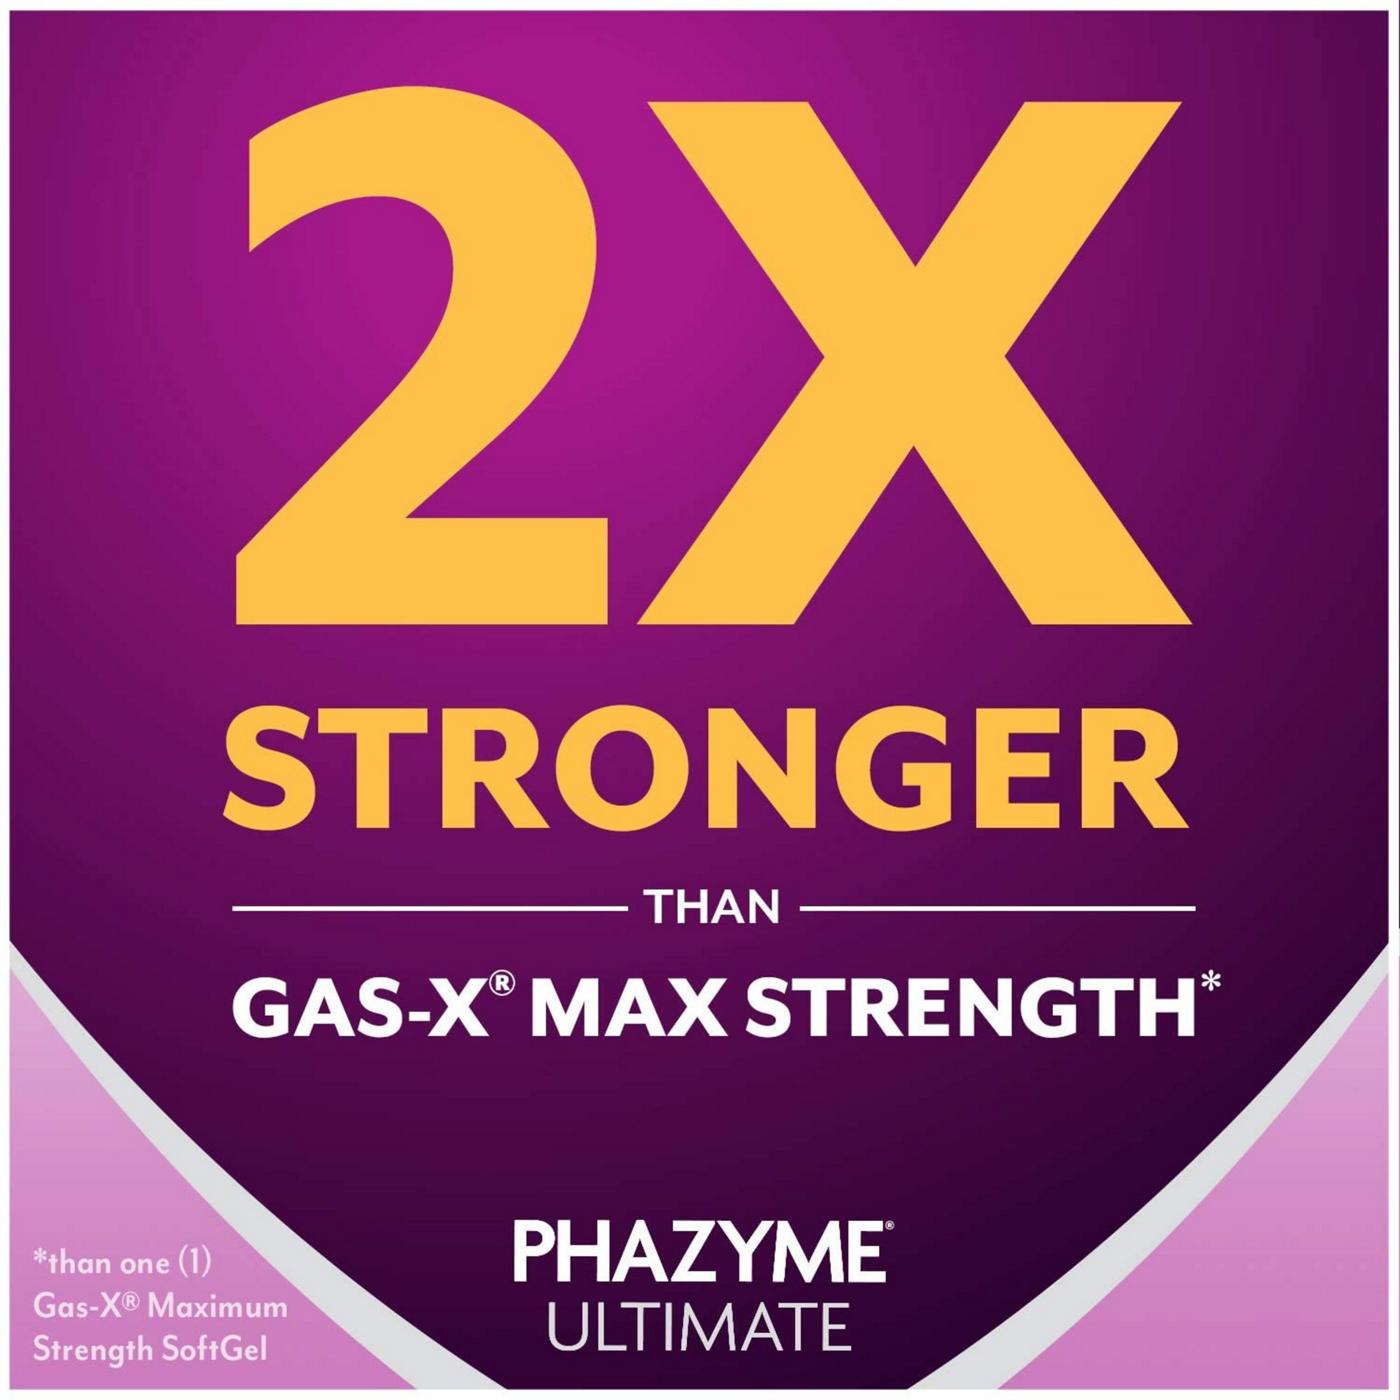 Phazyme Ultimate Gas & Bloating Relief; image 4 of 5